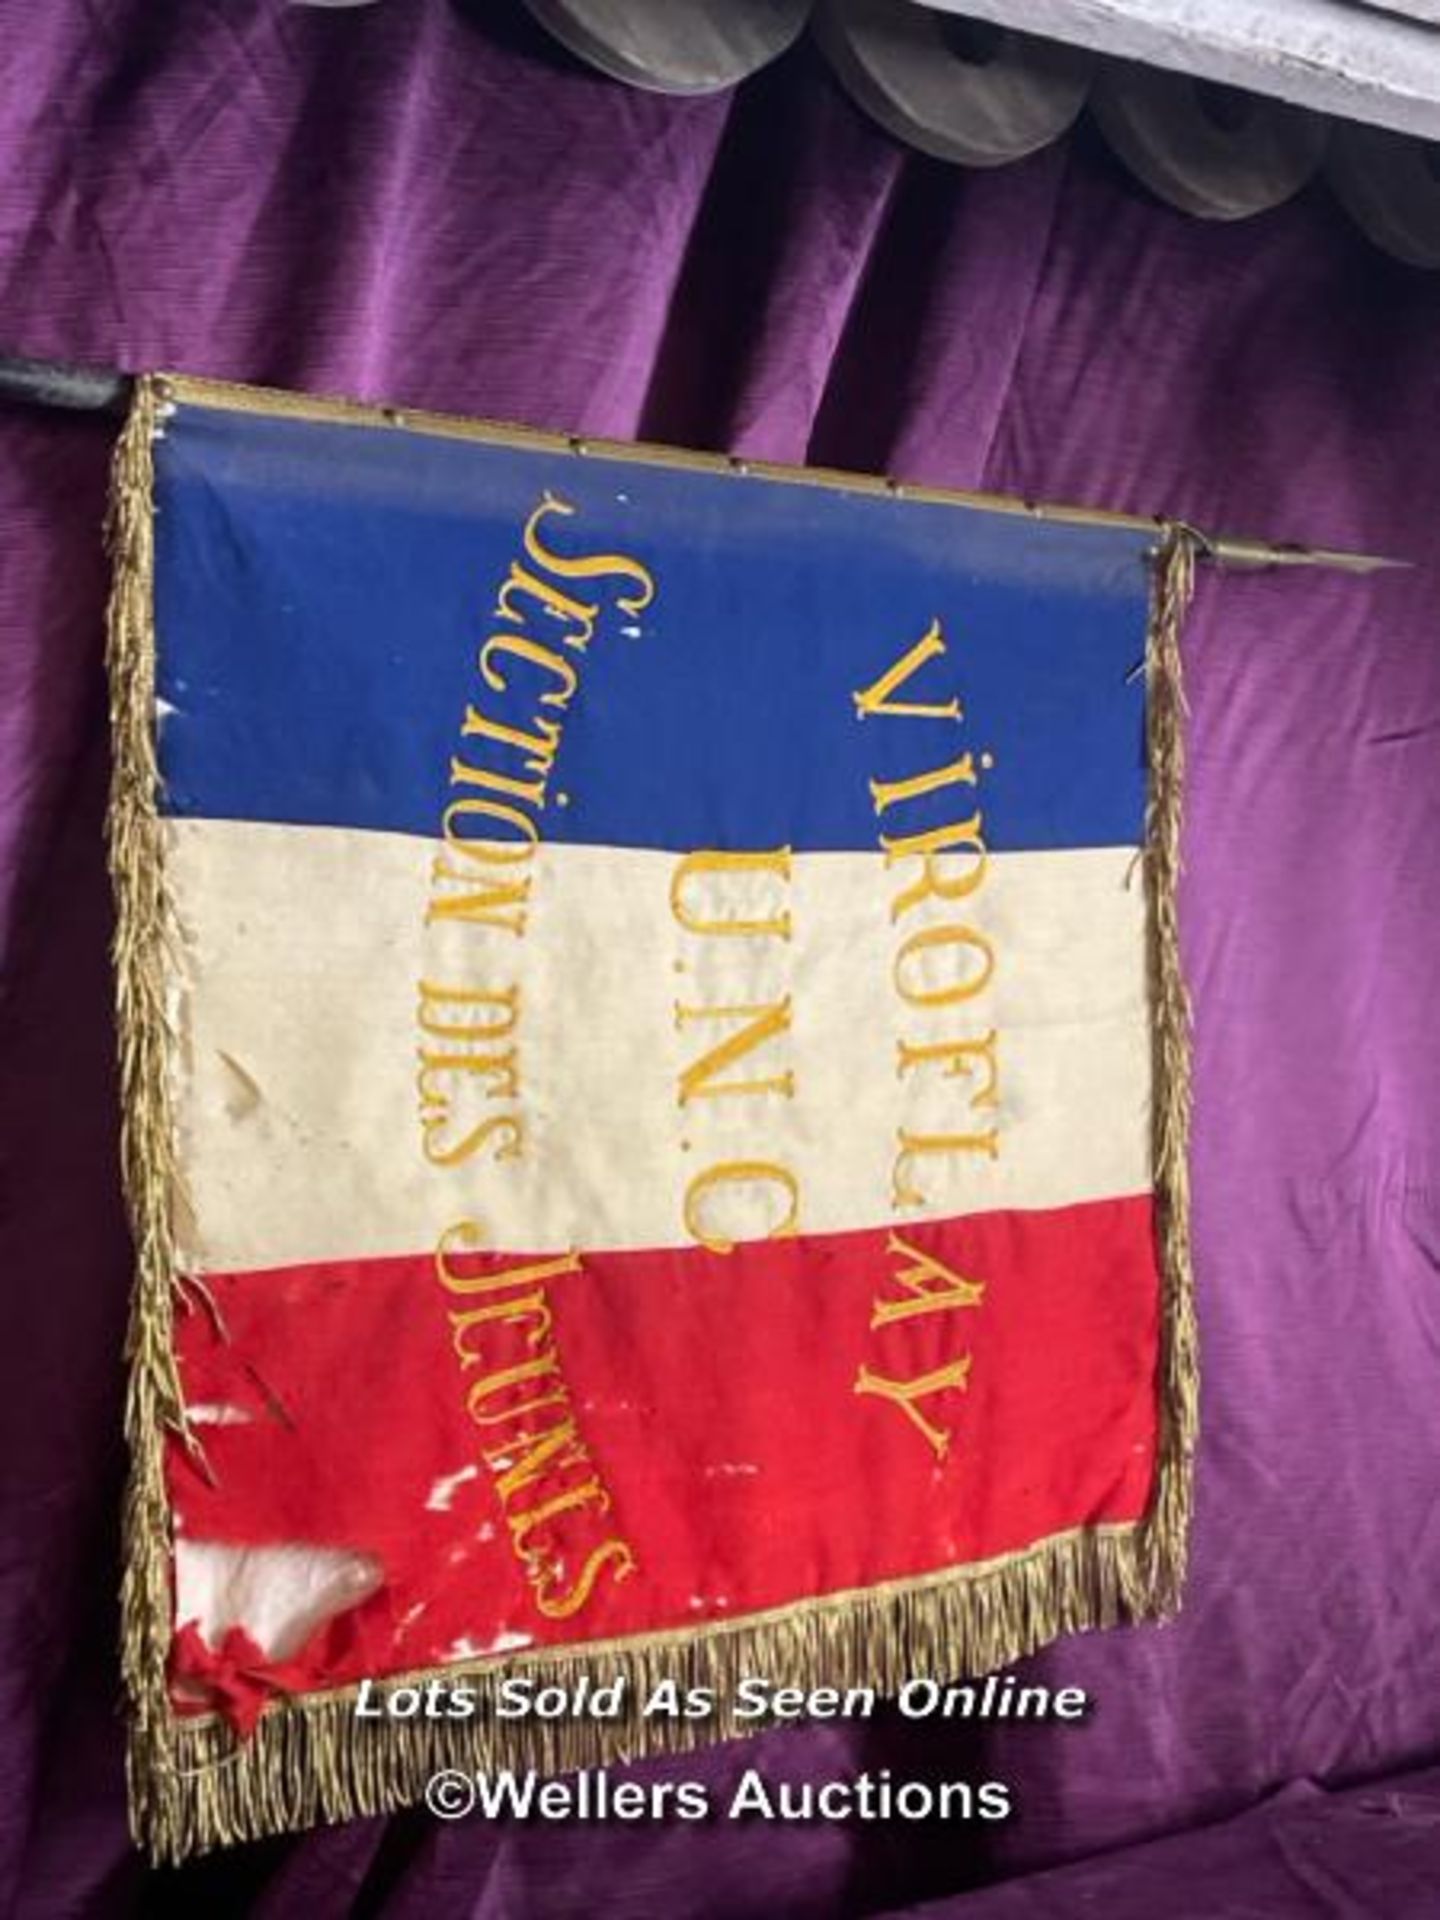 EARLY 20TH CENTURY COMMEMORATIVE FRENCH FLAG, VIROFLAY U.N.C. SECTION DES JEUNES, POLE HEIGHT 108CM, - Image 2 of 4